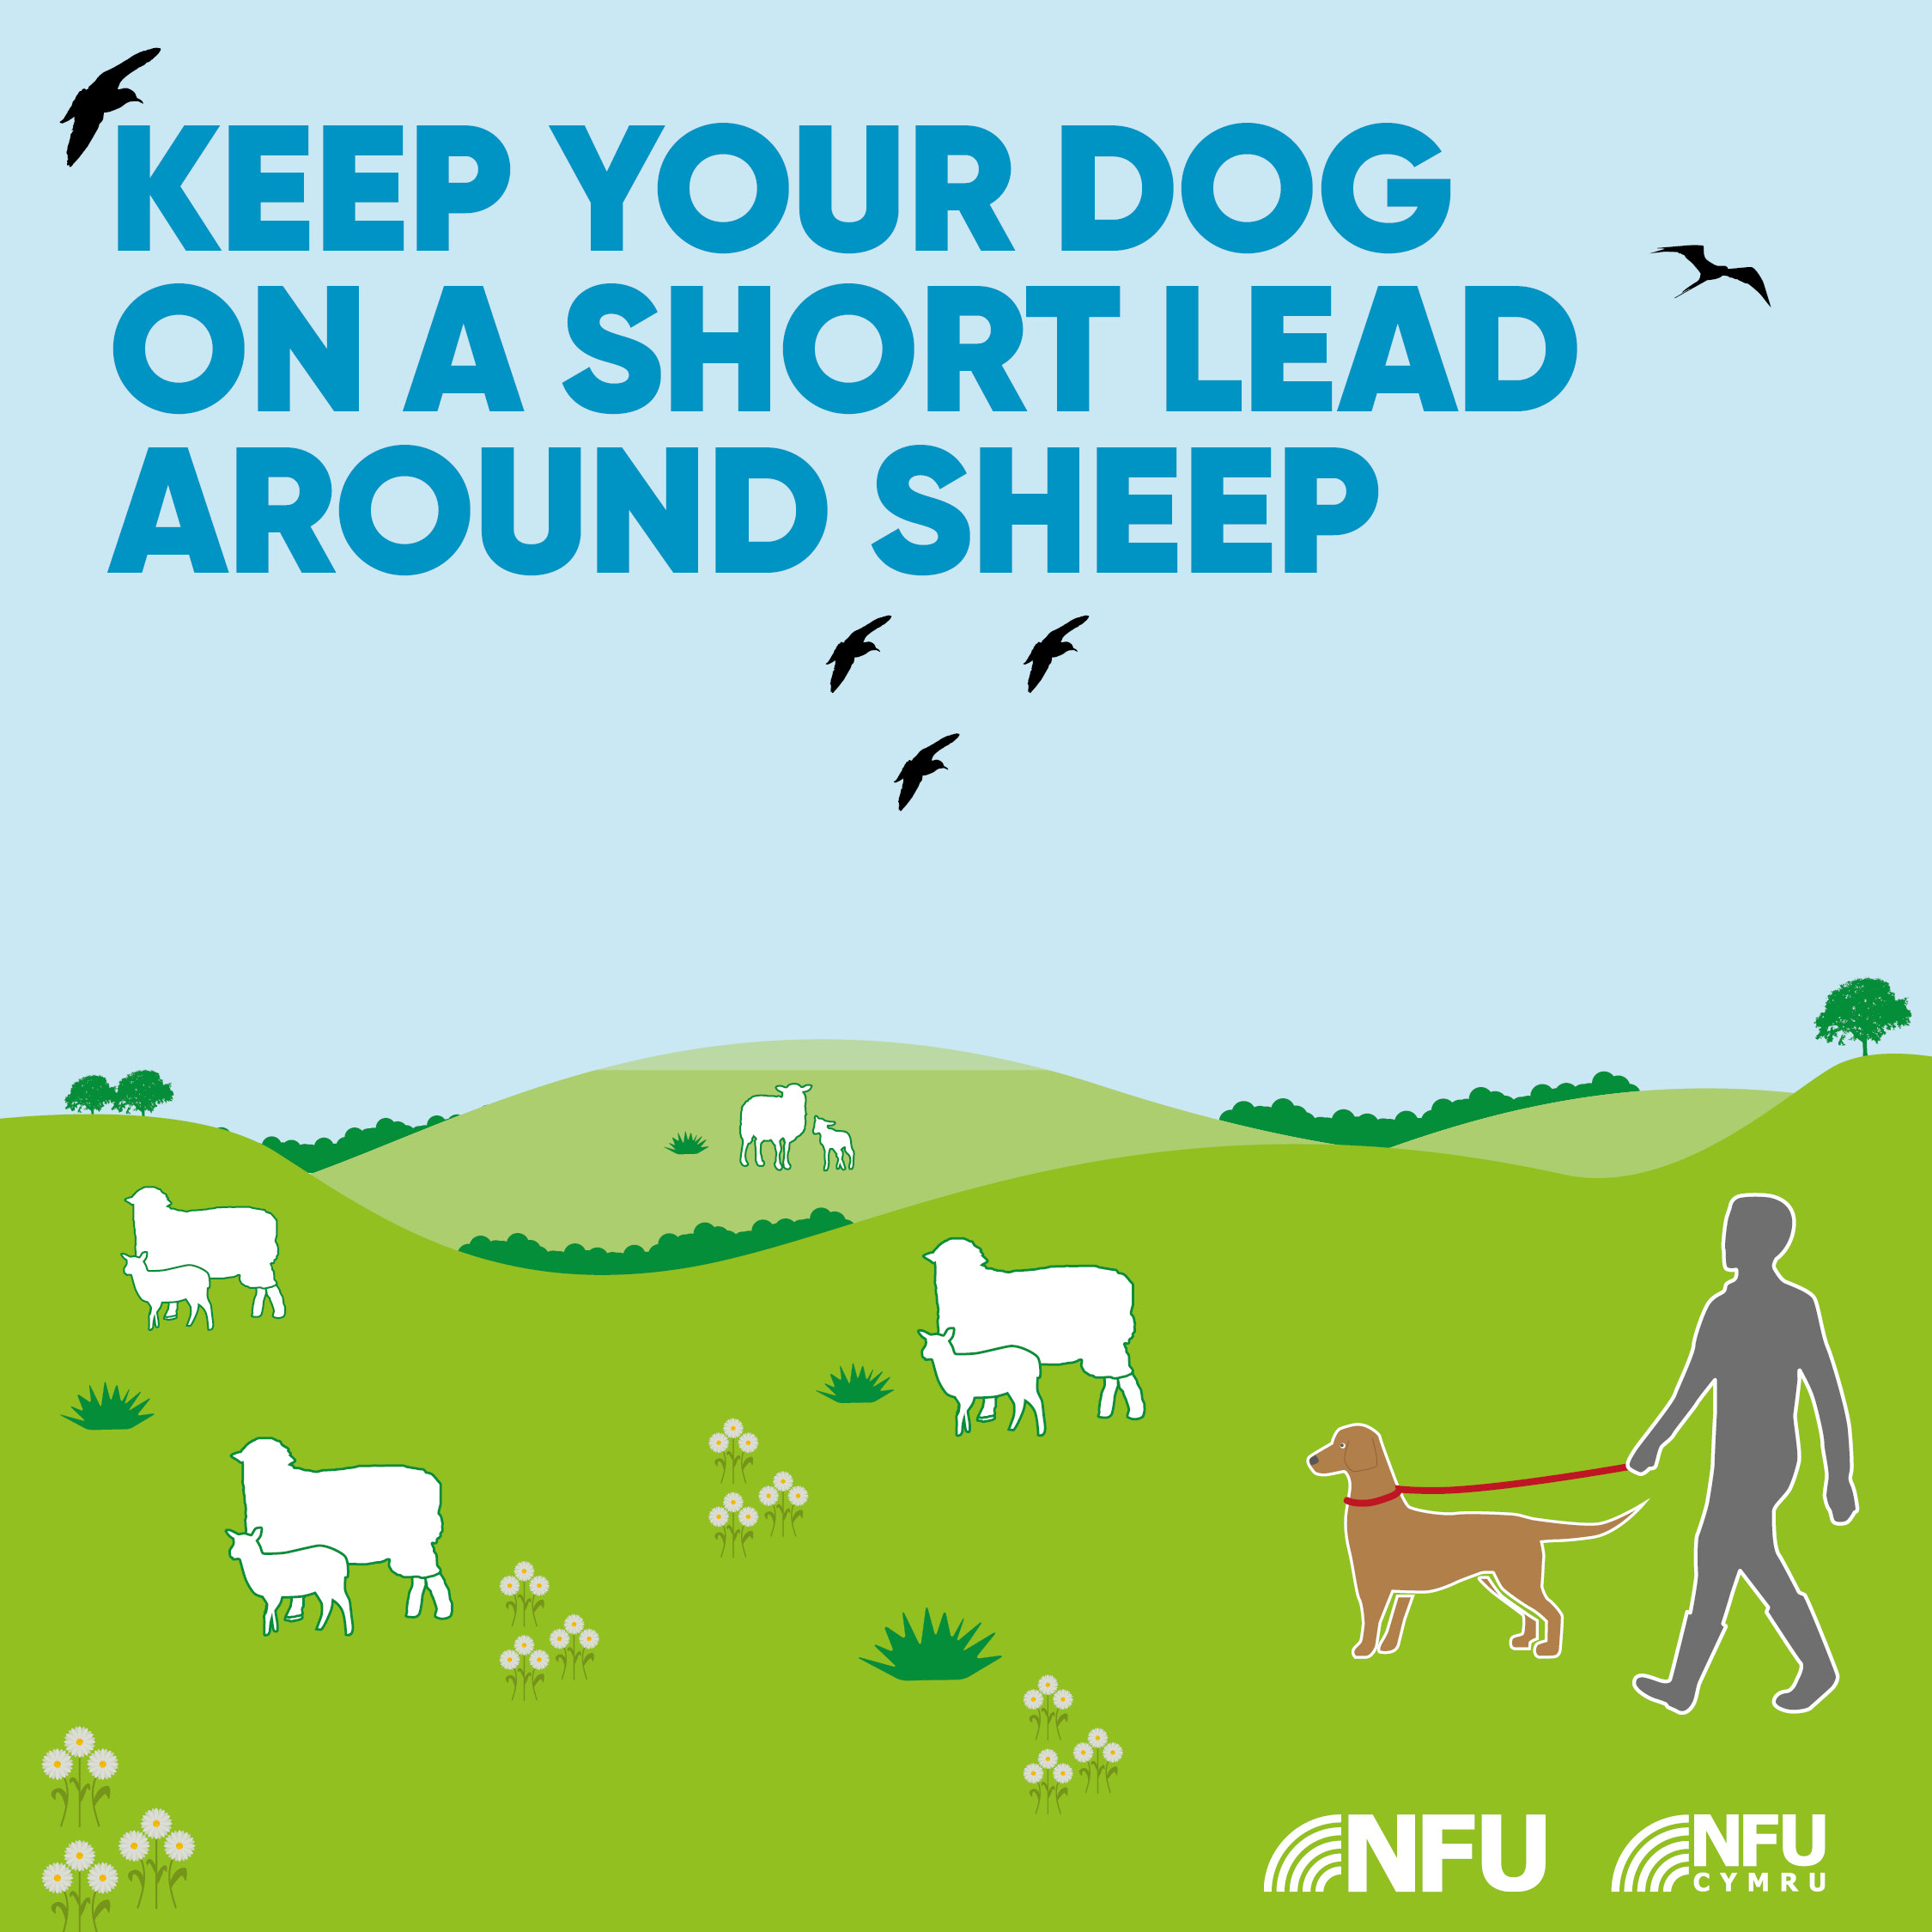 Keep your dog on a short lead around sheep